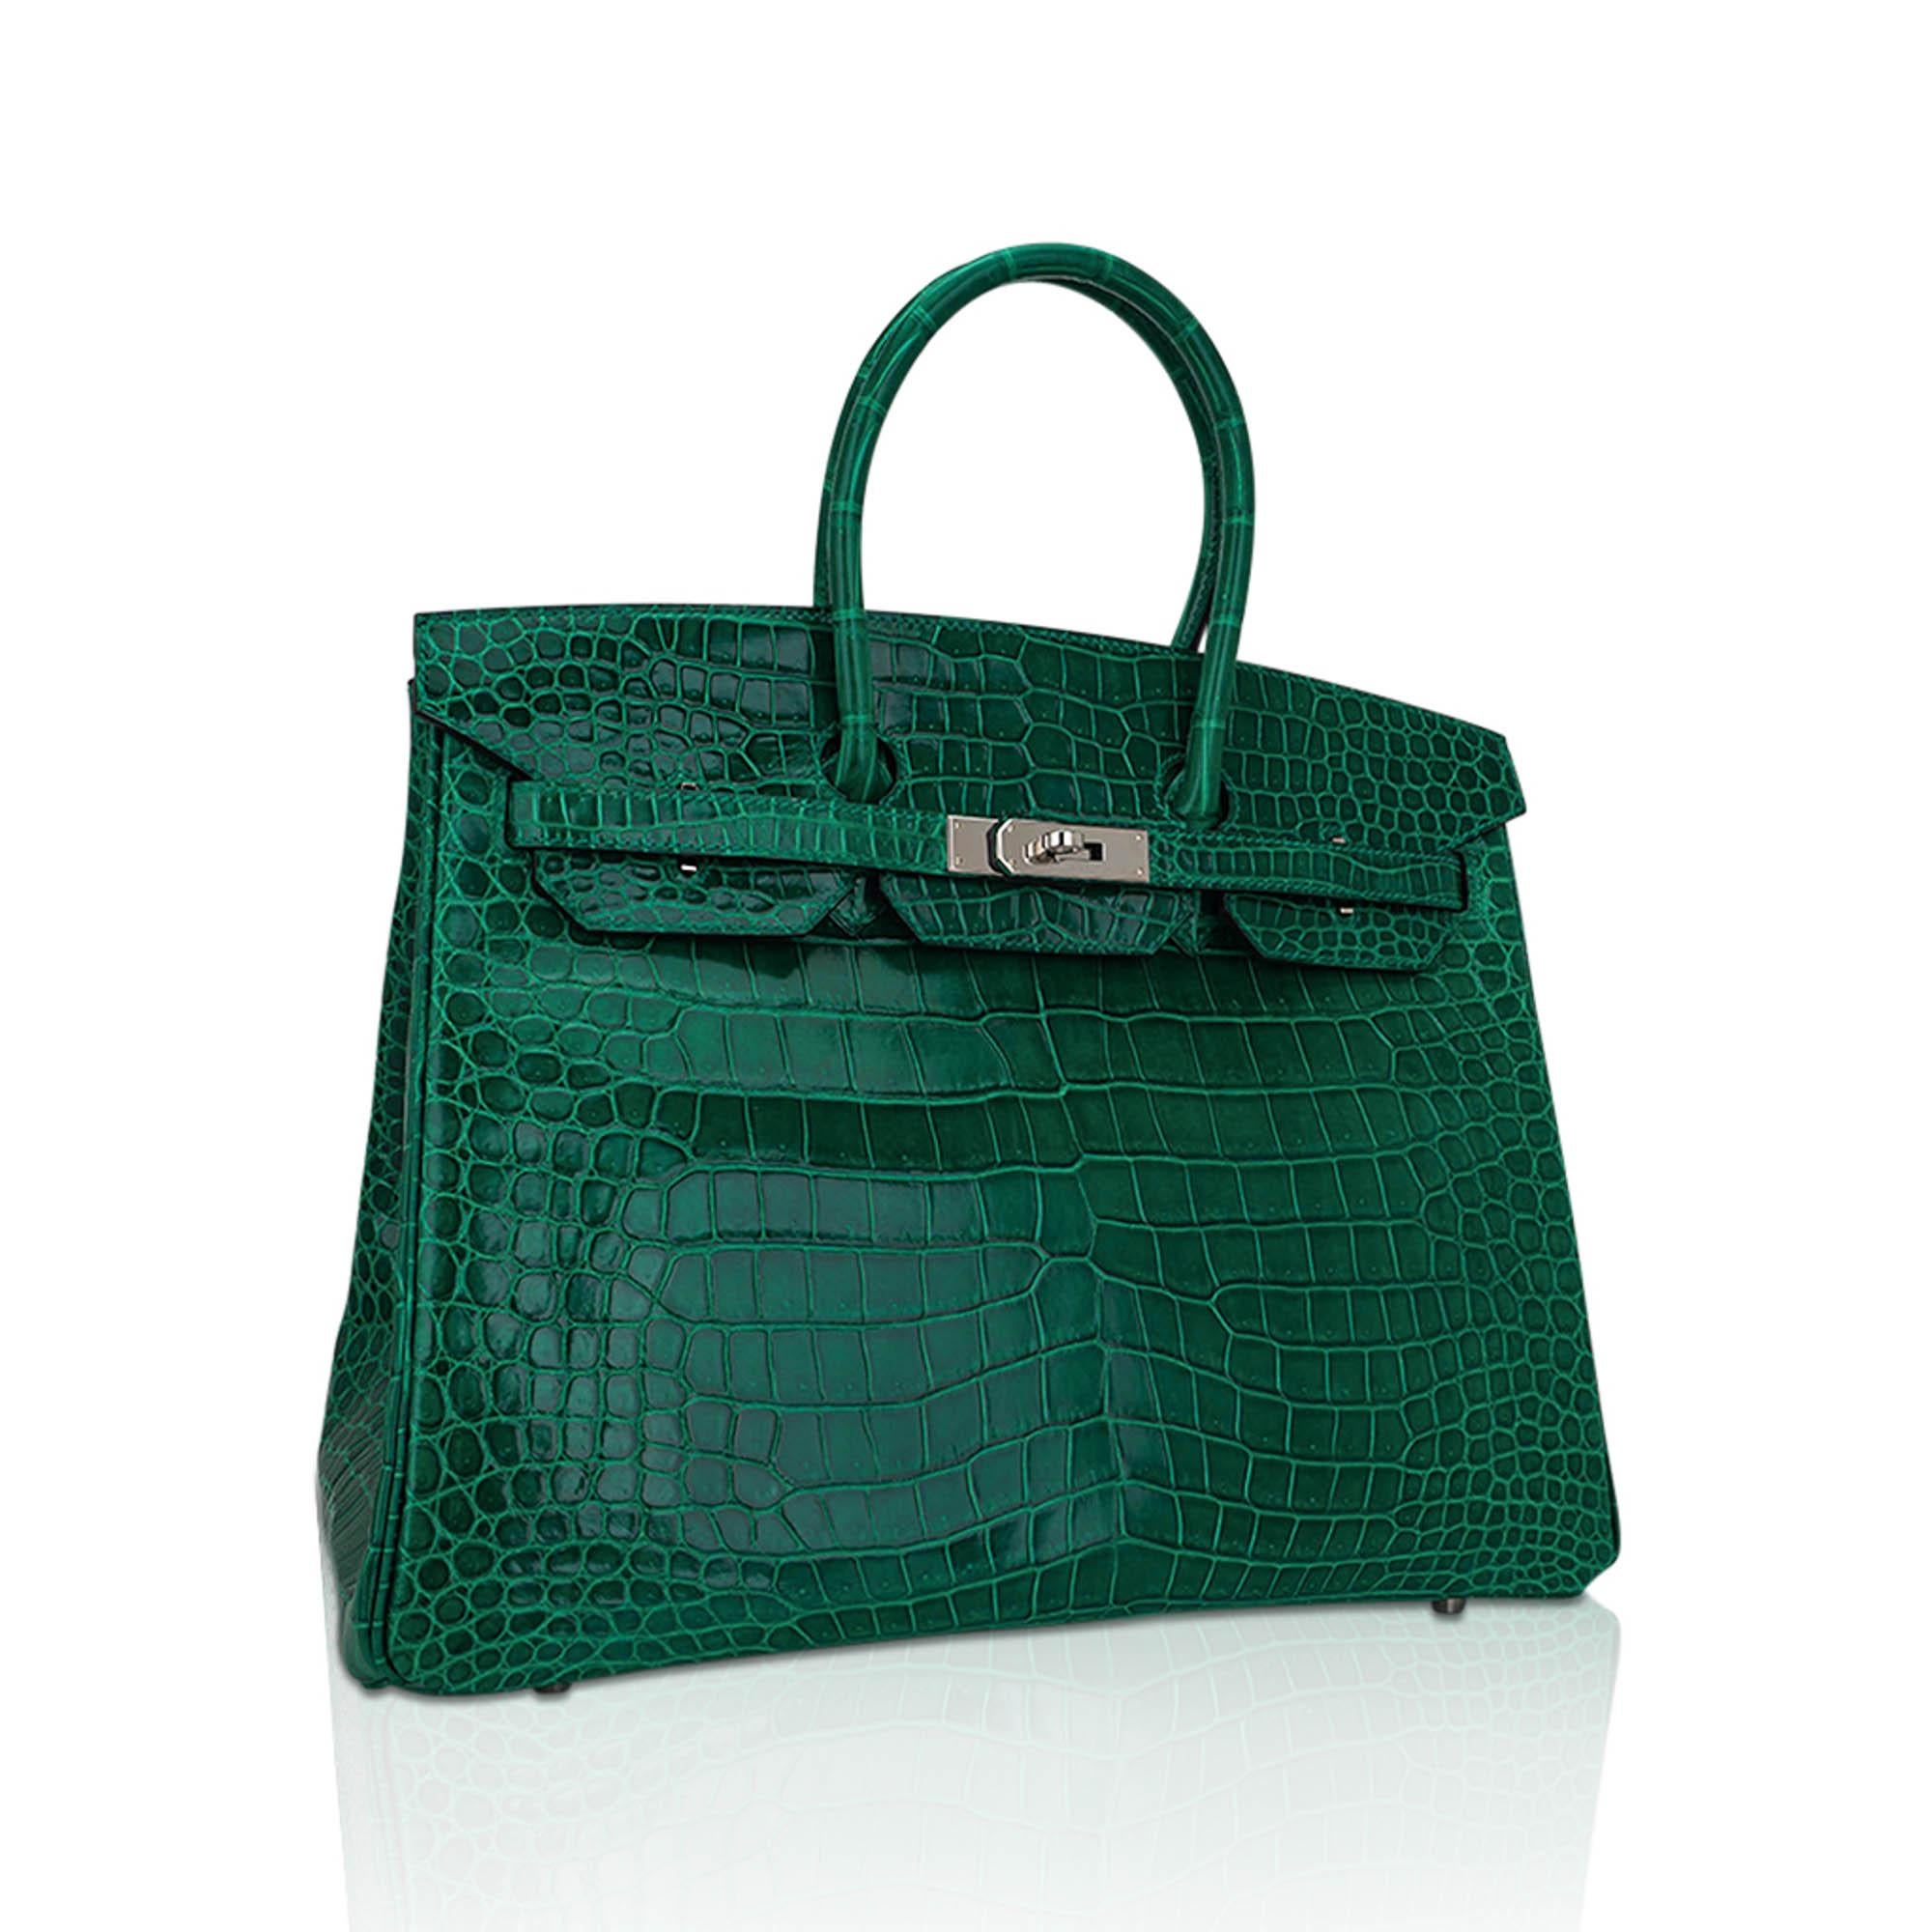 Mightychic offers an Hermes Birkin 35 bag featured in Emerald Porosus Crocodile.
This stunning Hermes Birkin bag is a rich jewel toned emerald and one the most collectible and rare colours to find.
Fresh with Palladium hardware.
Comes with lock,